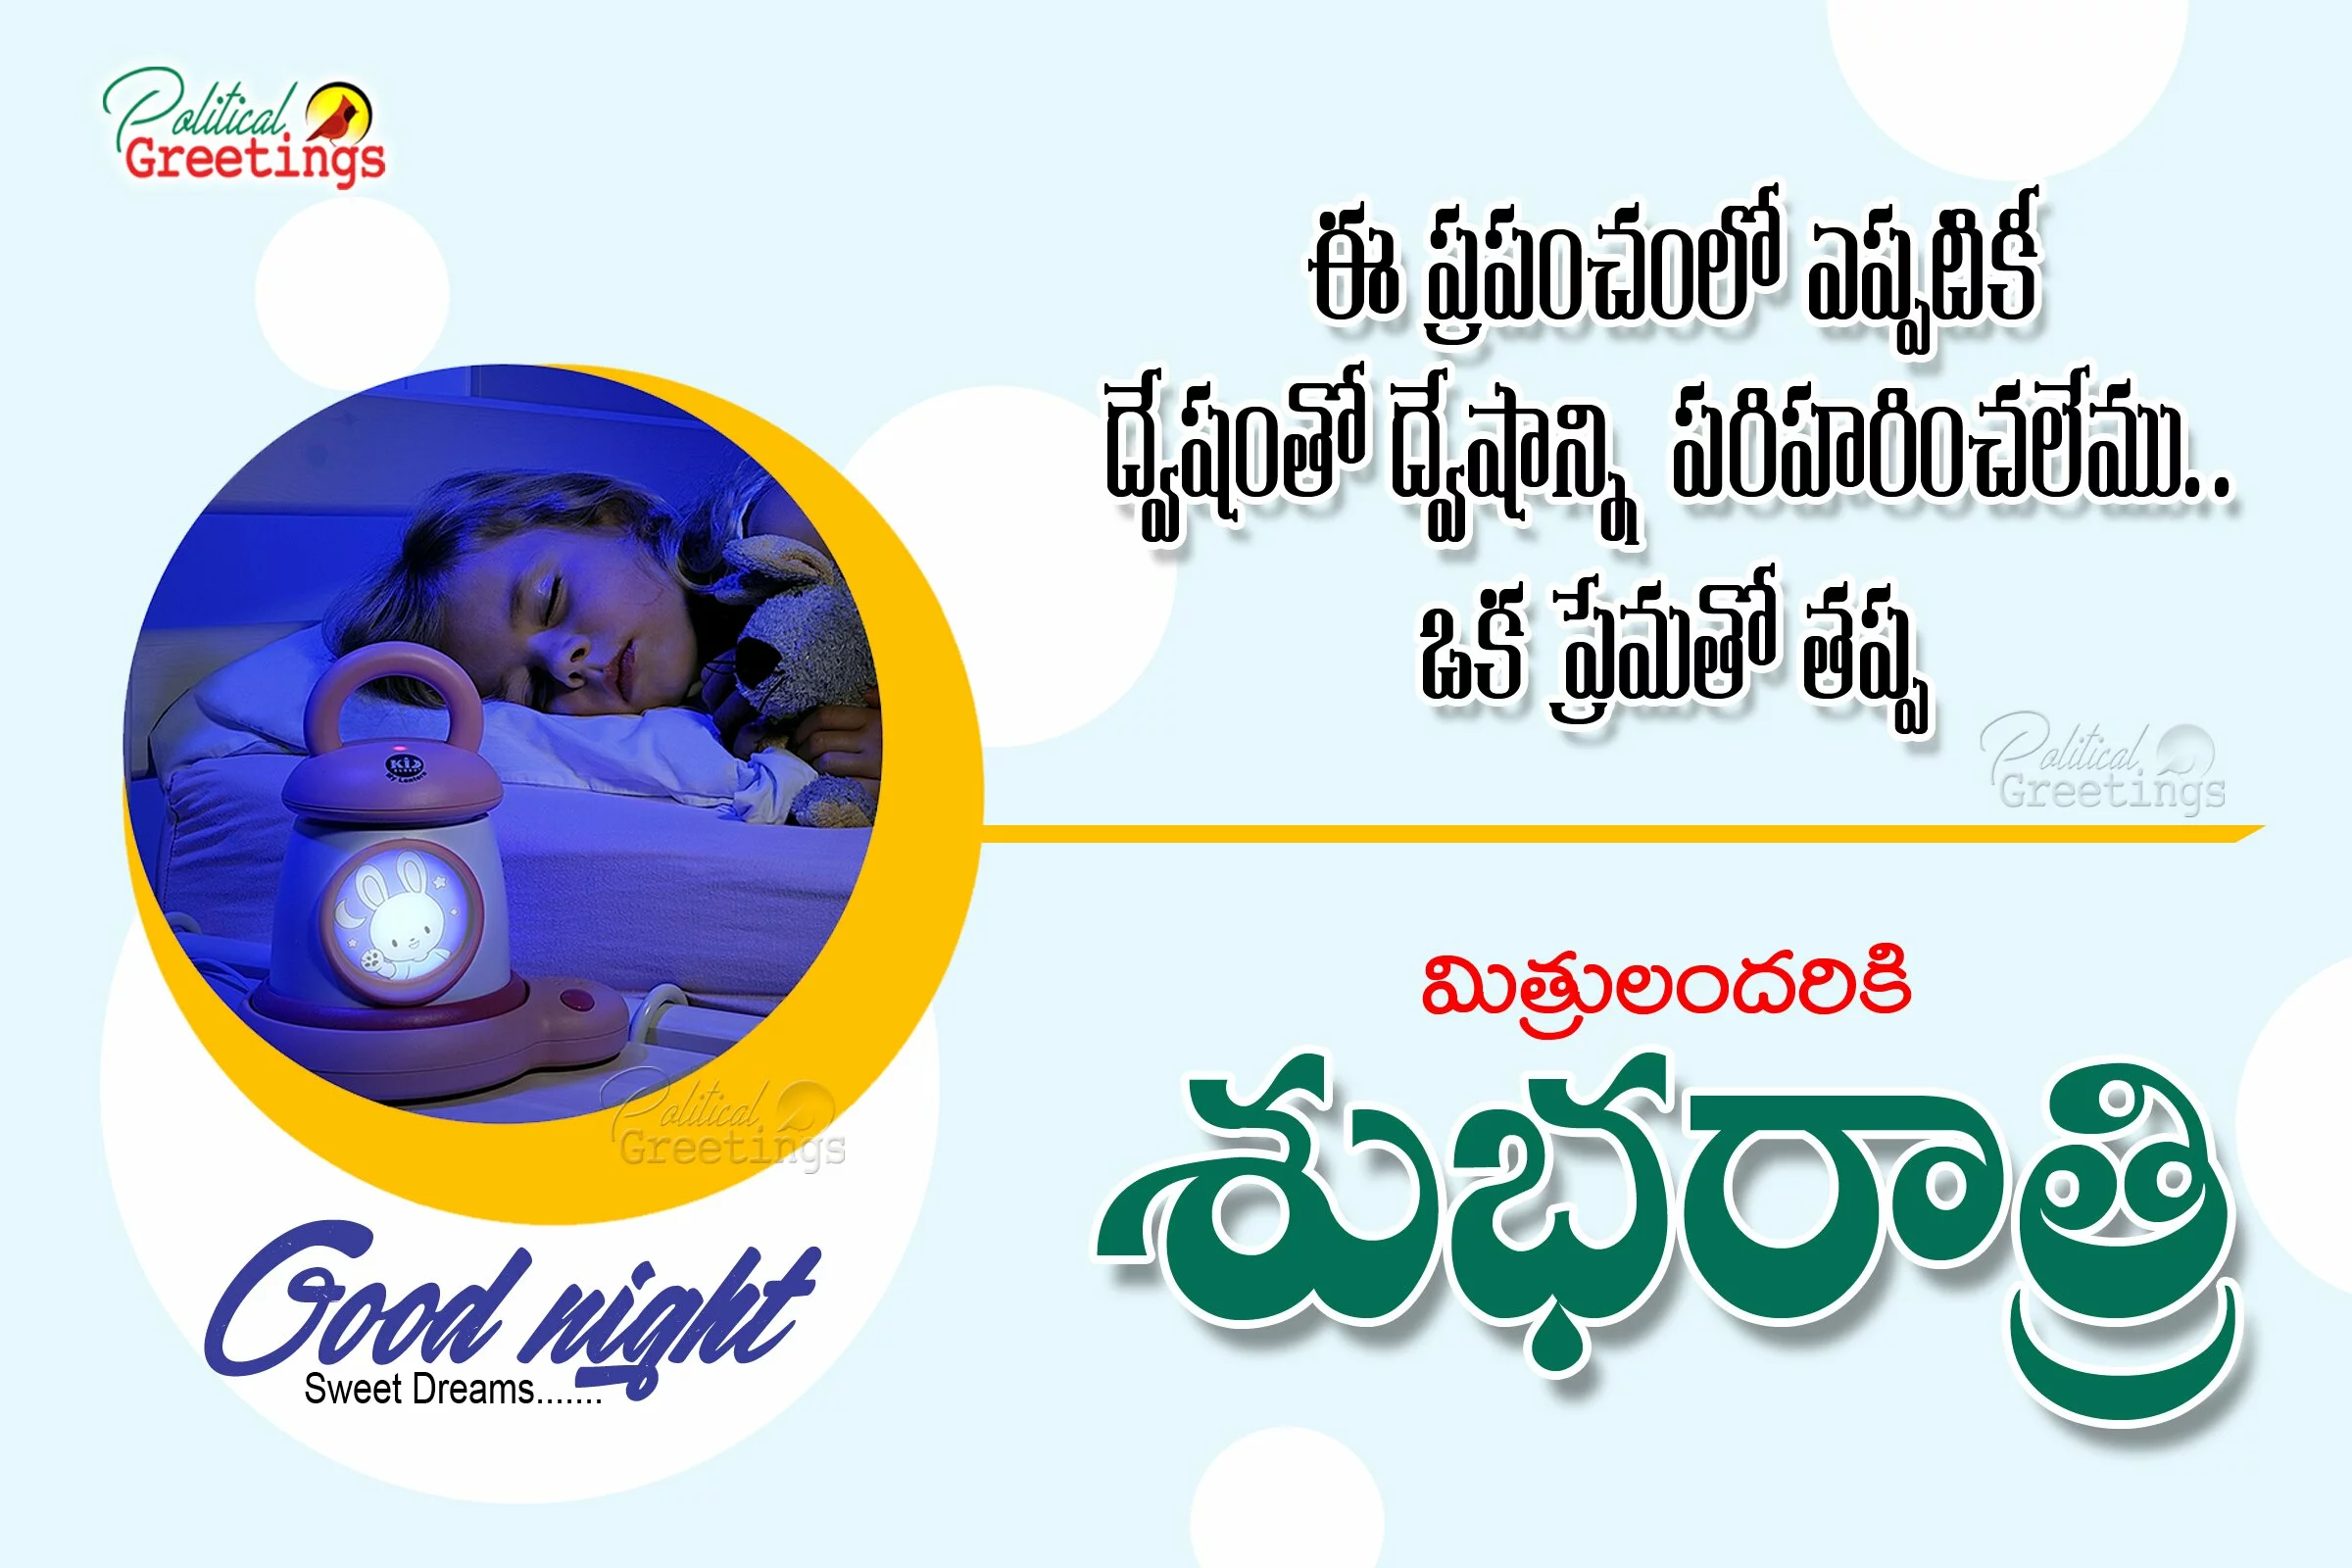 Best of The Good night Greetings messages Quotes in Telugu